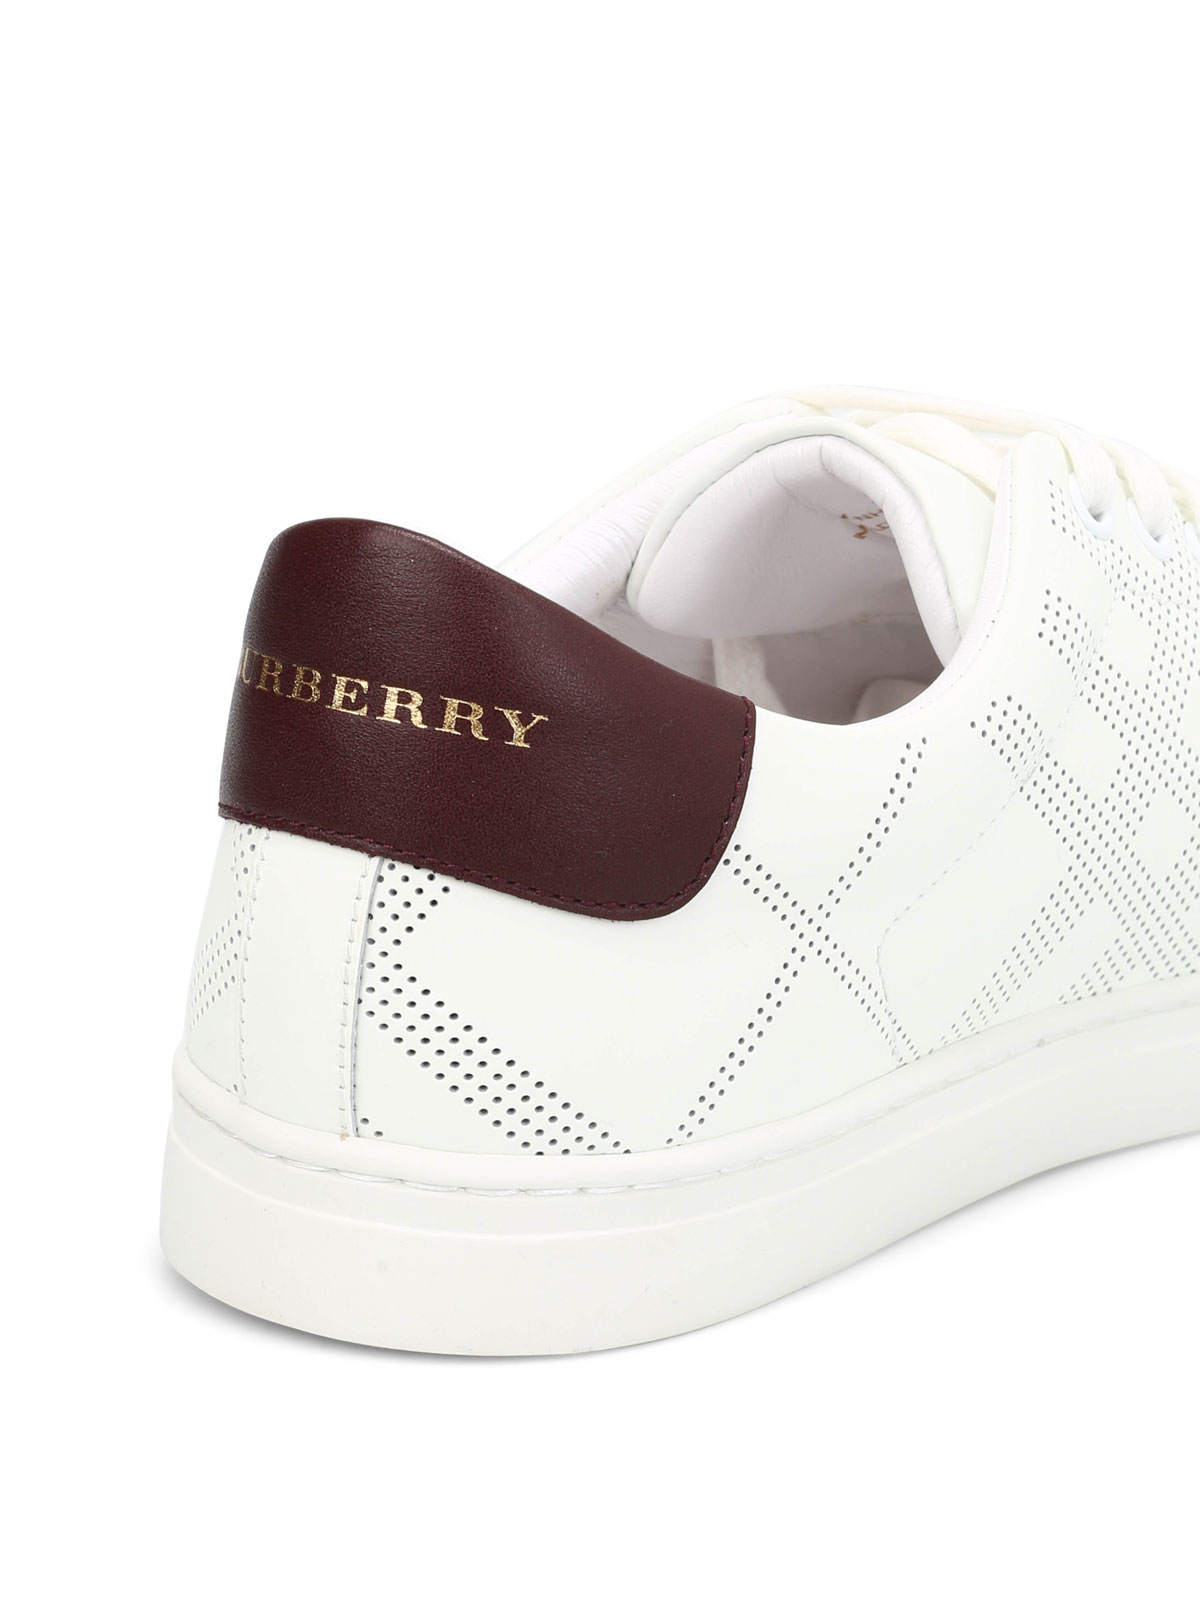 burberry perforated leather sneakers